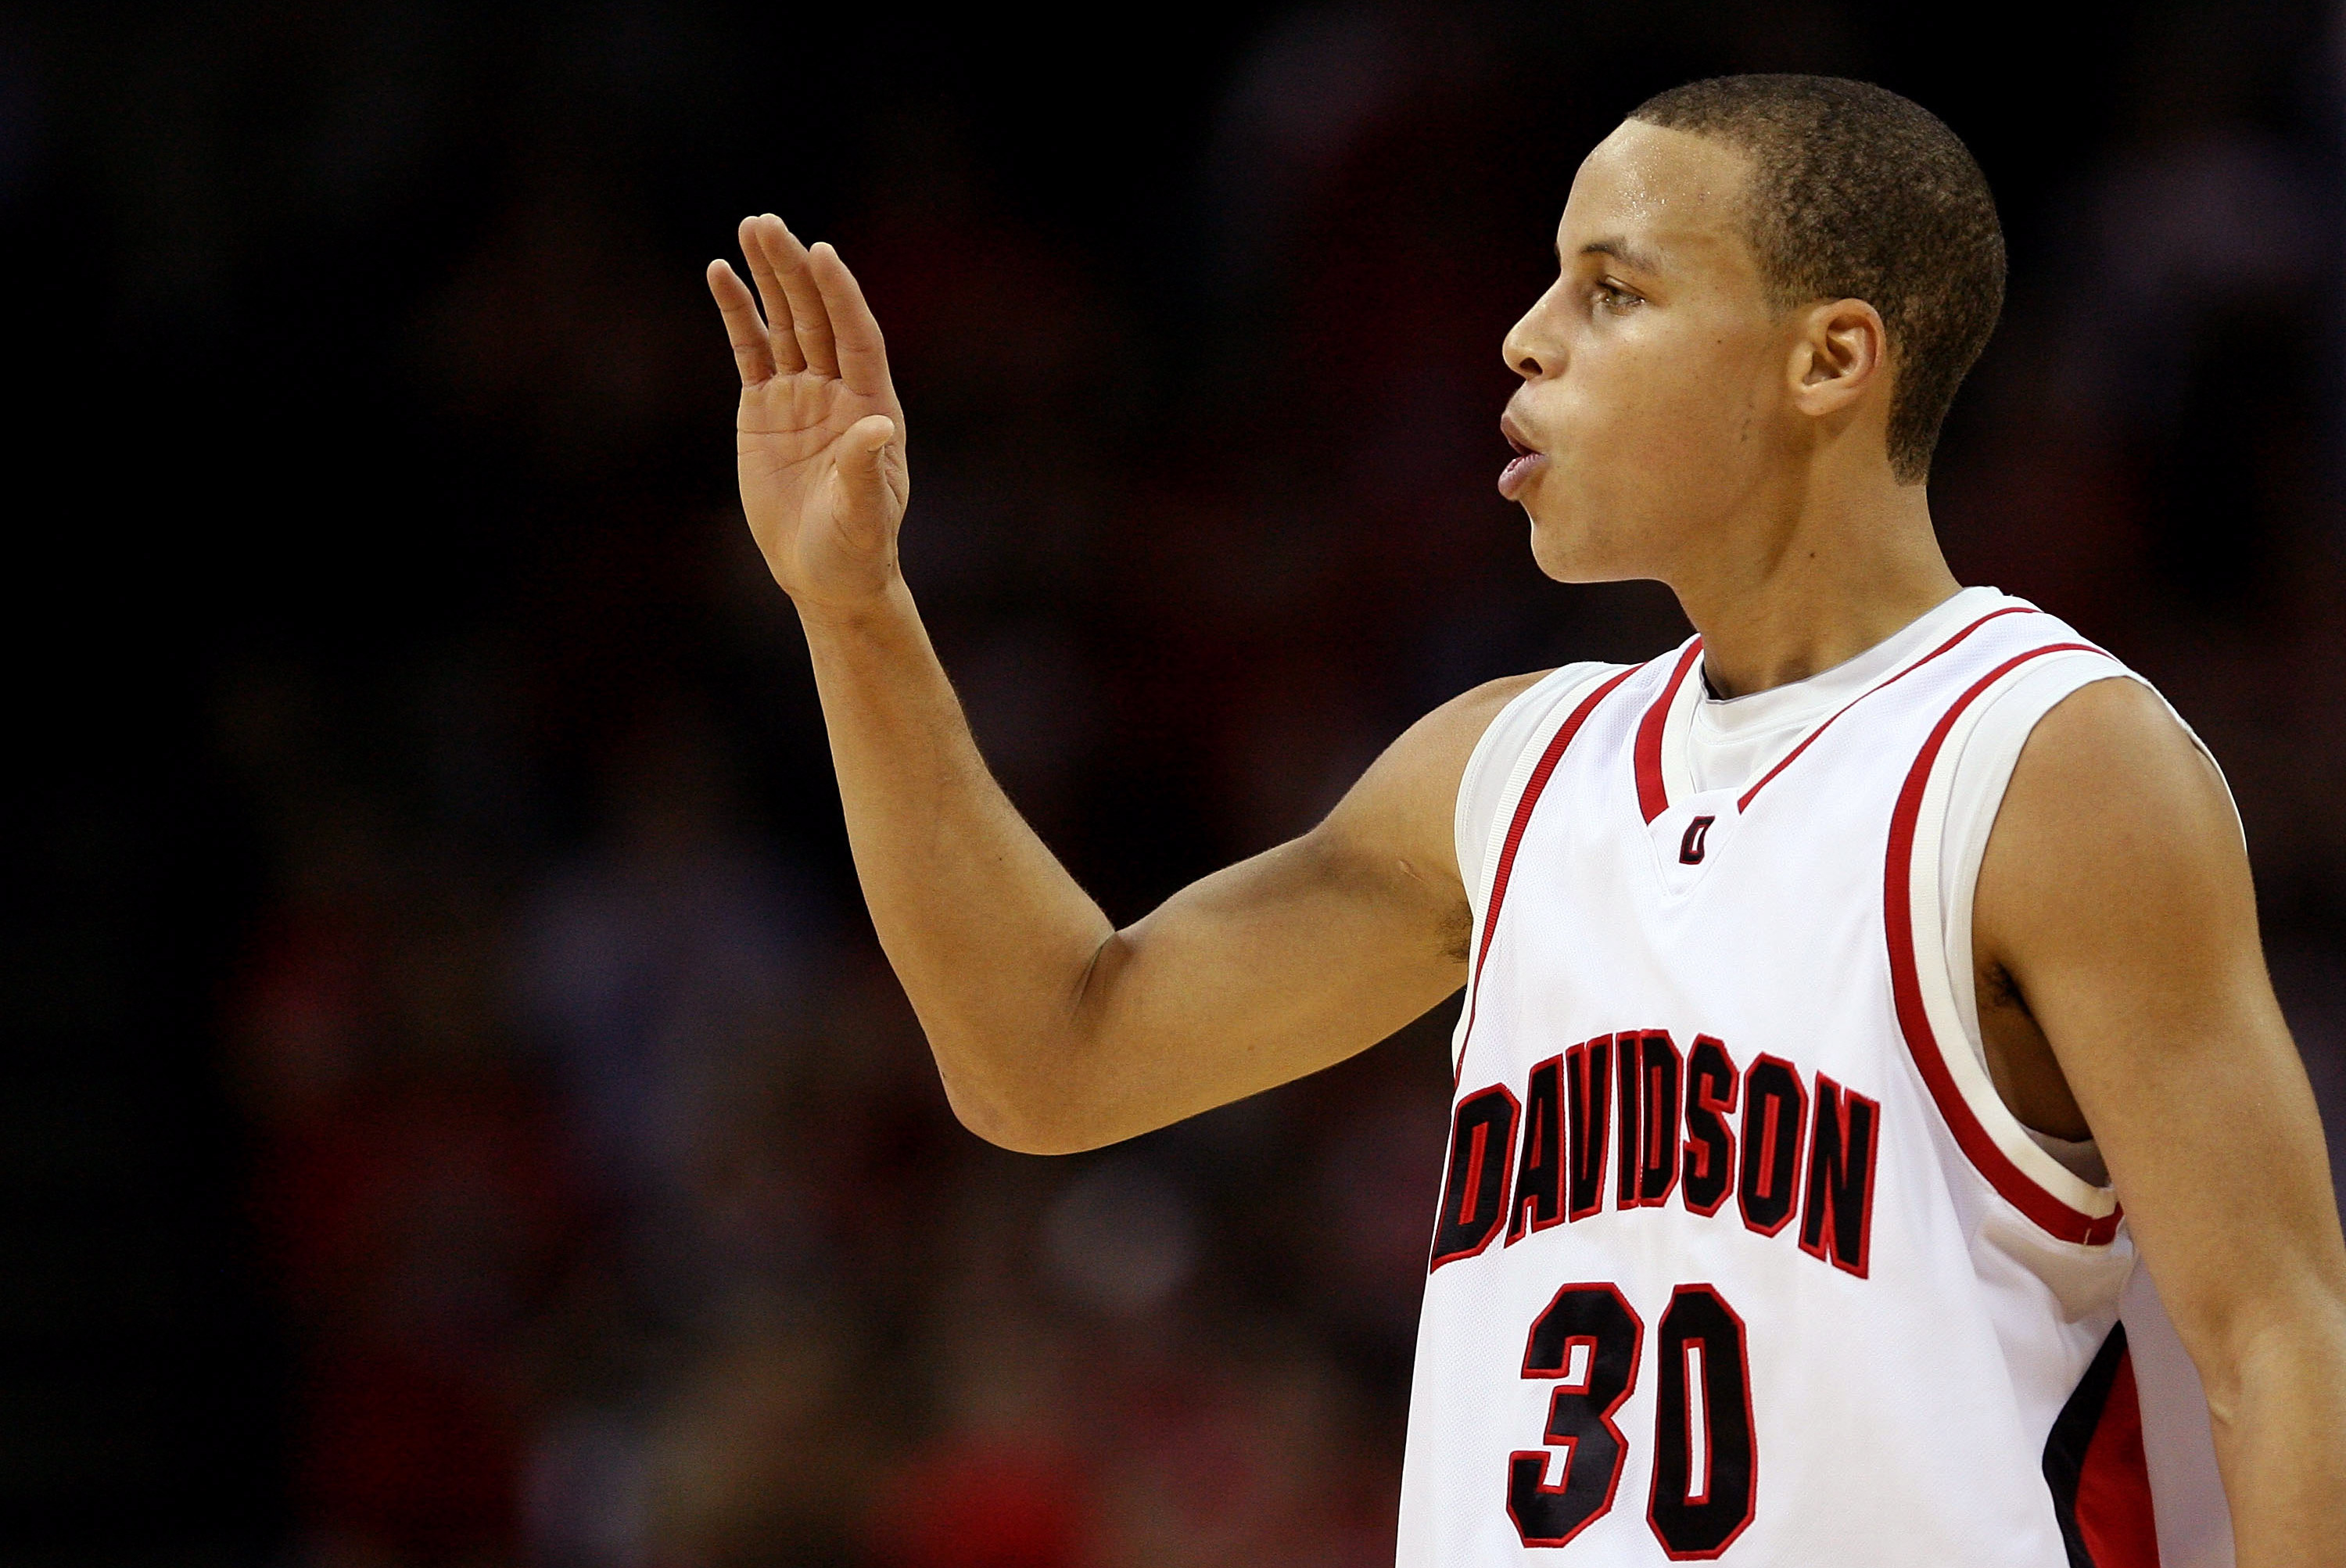 Stephen Curry: Basketball career from Davidson to NBA Warriors